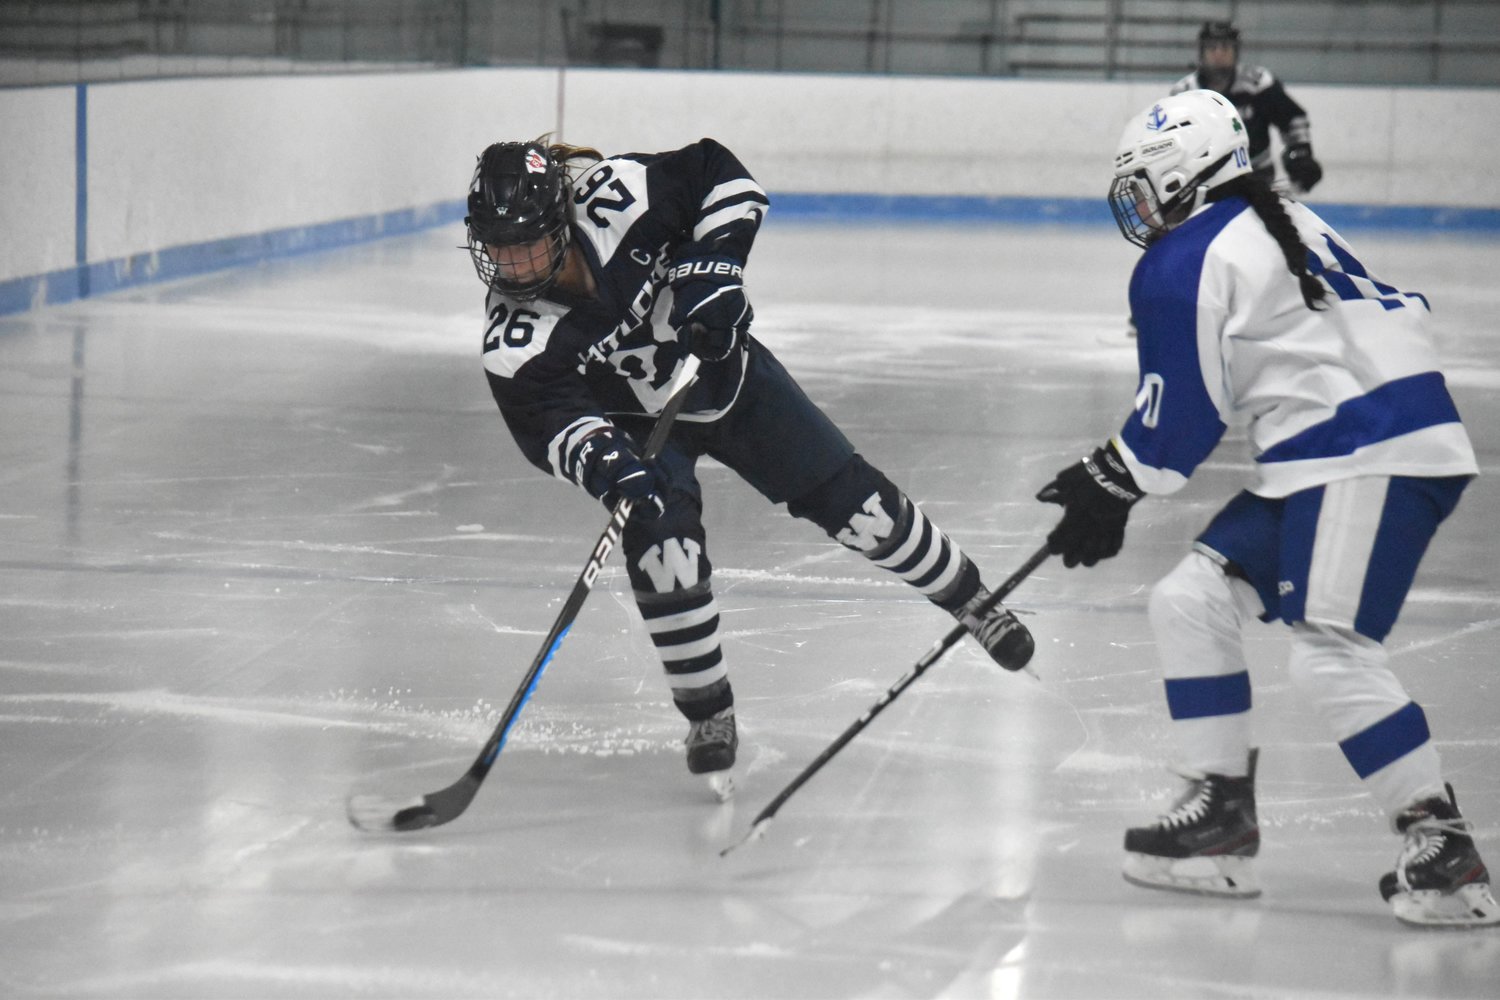 Claire Misurelli takes a shot during Friday’s 7-1 road loss to Scituate. The junior scored a goal a day earlier against Brookline.